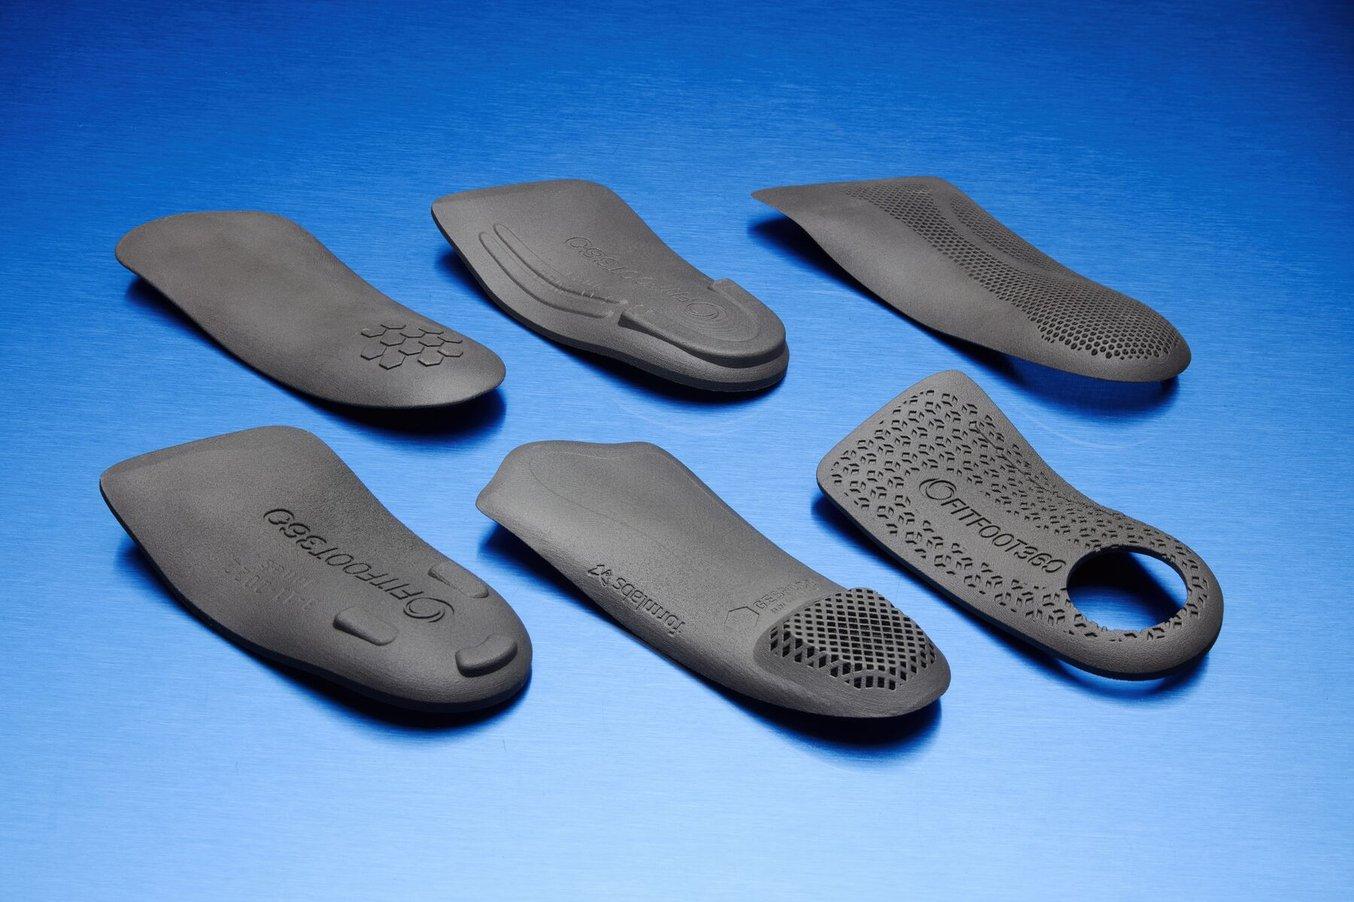 3D Printed insoles on a Blue Background